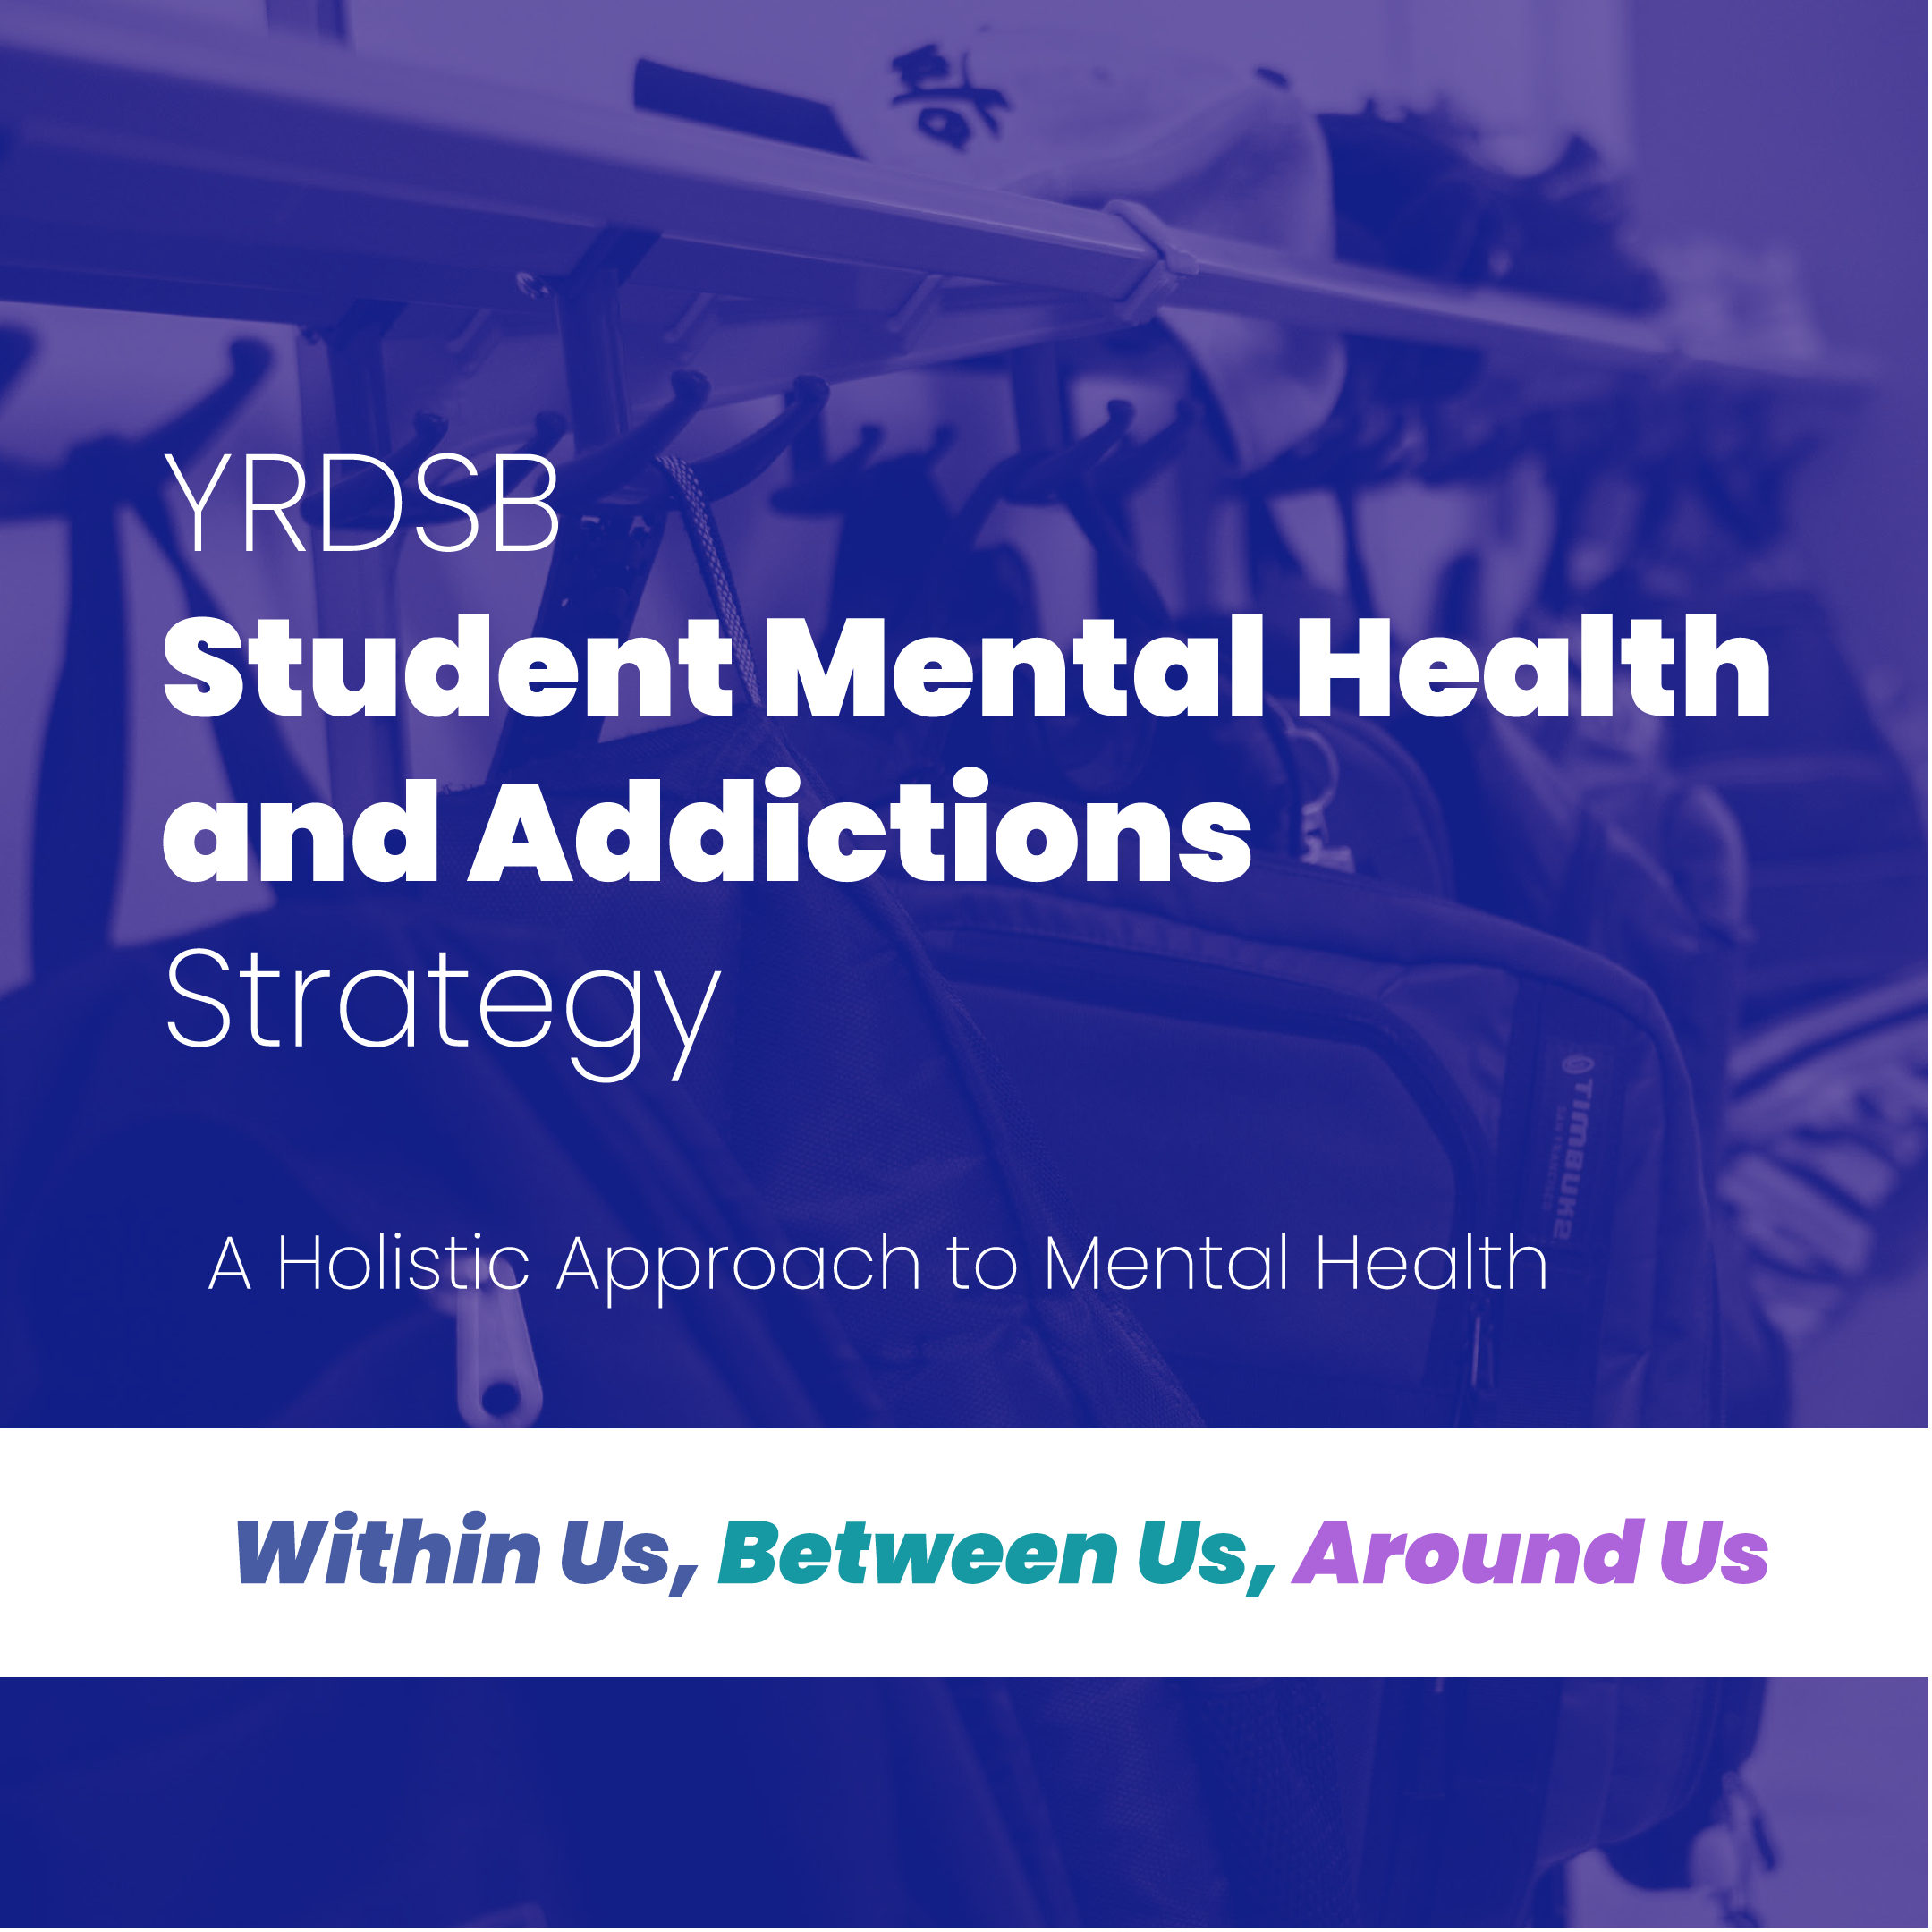 Image of strategy cover with title: YRDSB Student Mental Health and Addictions Strategy: a Holistic Approach to Mental Health